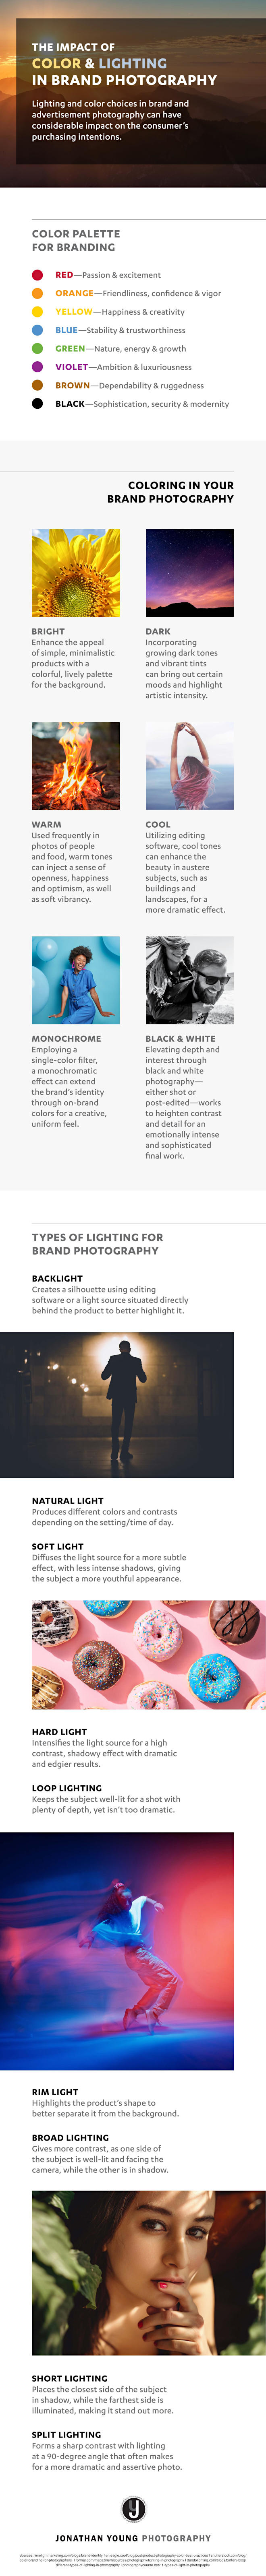 Infographic - The Influence Of Color And Lighting On Brand Photography